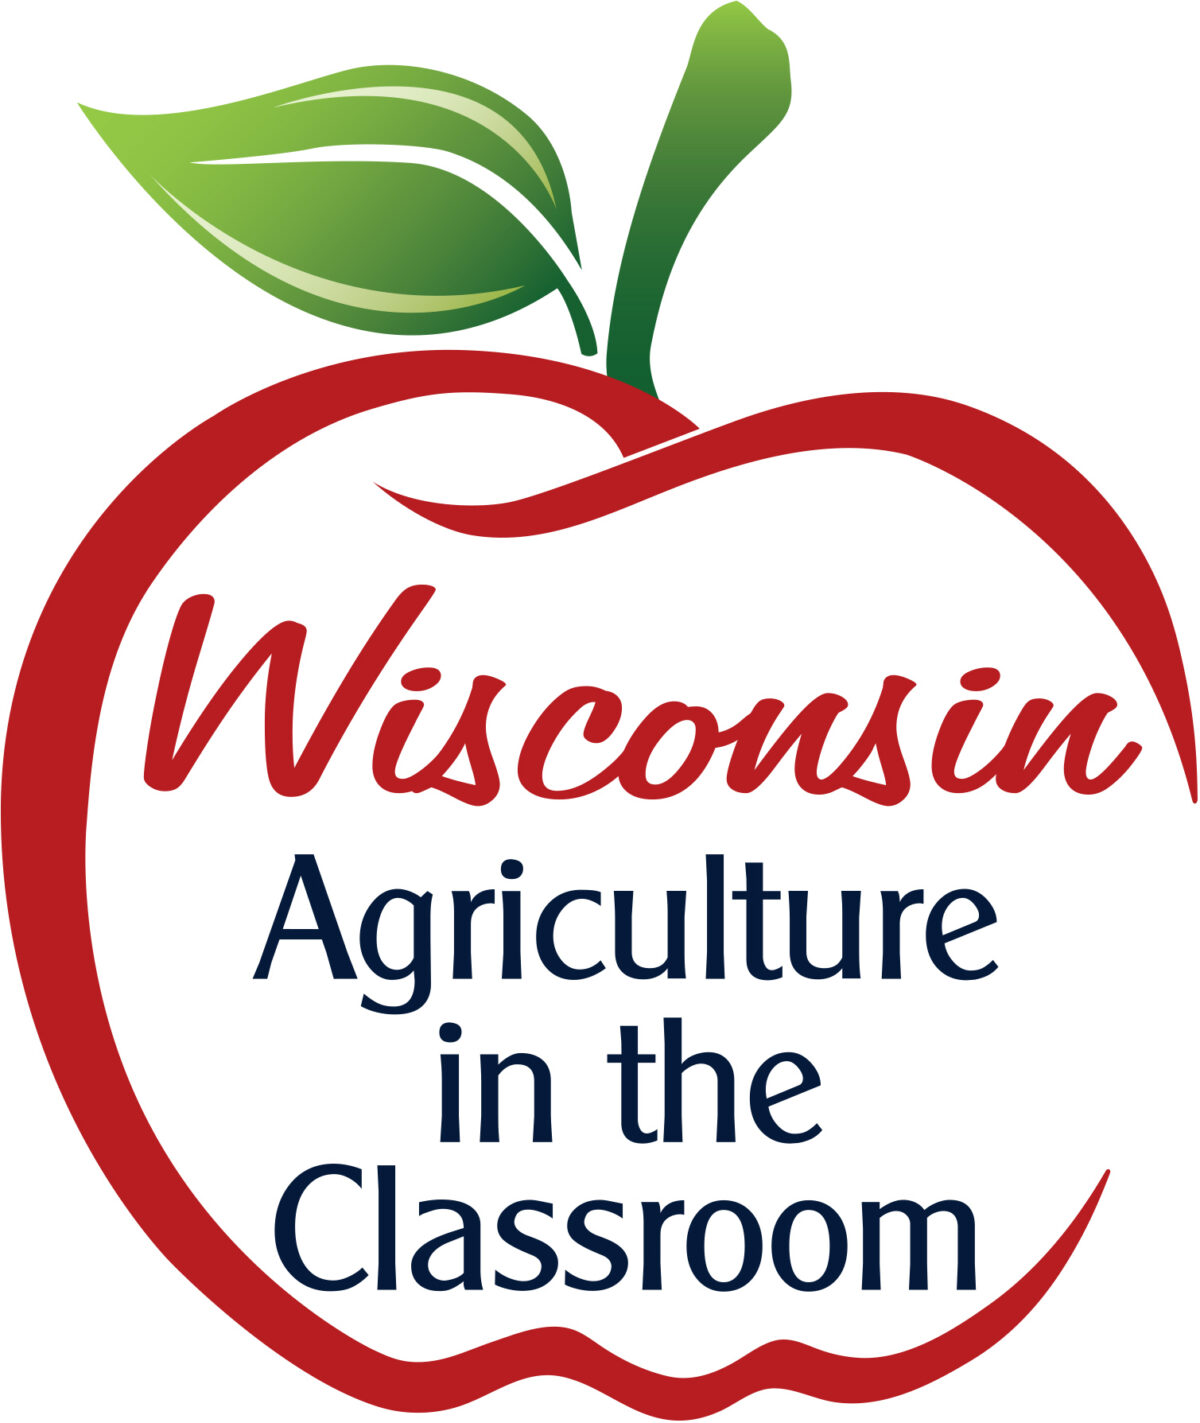 Connecting Students to Wisconsin Agriculture